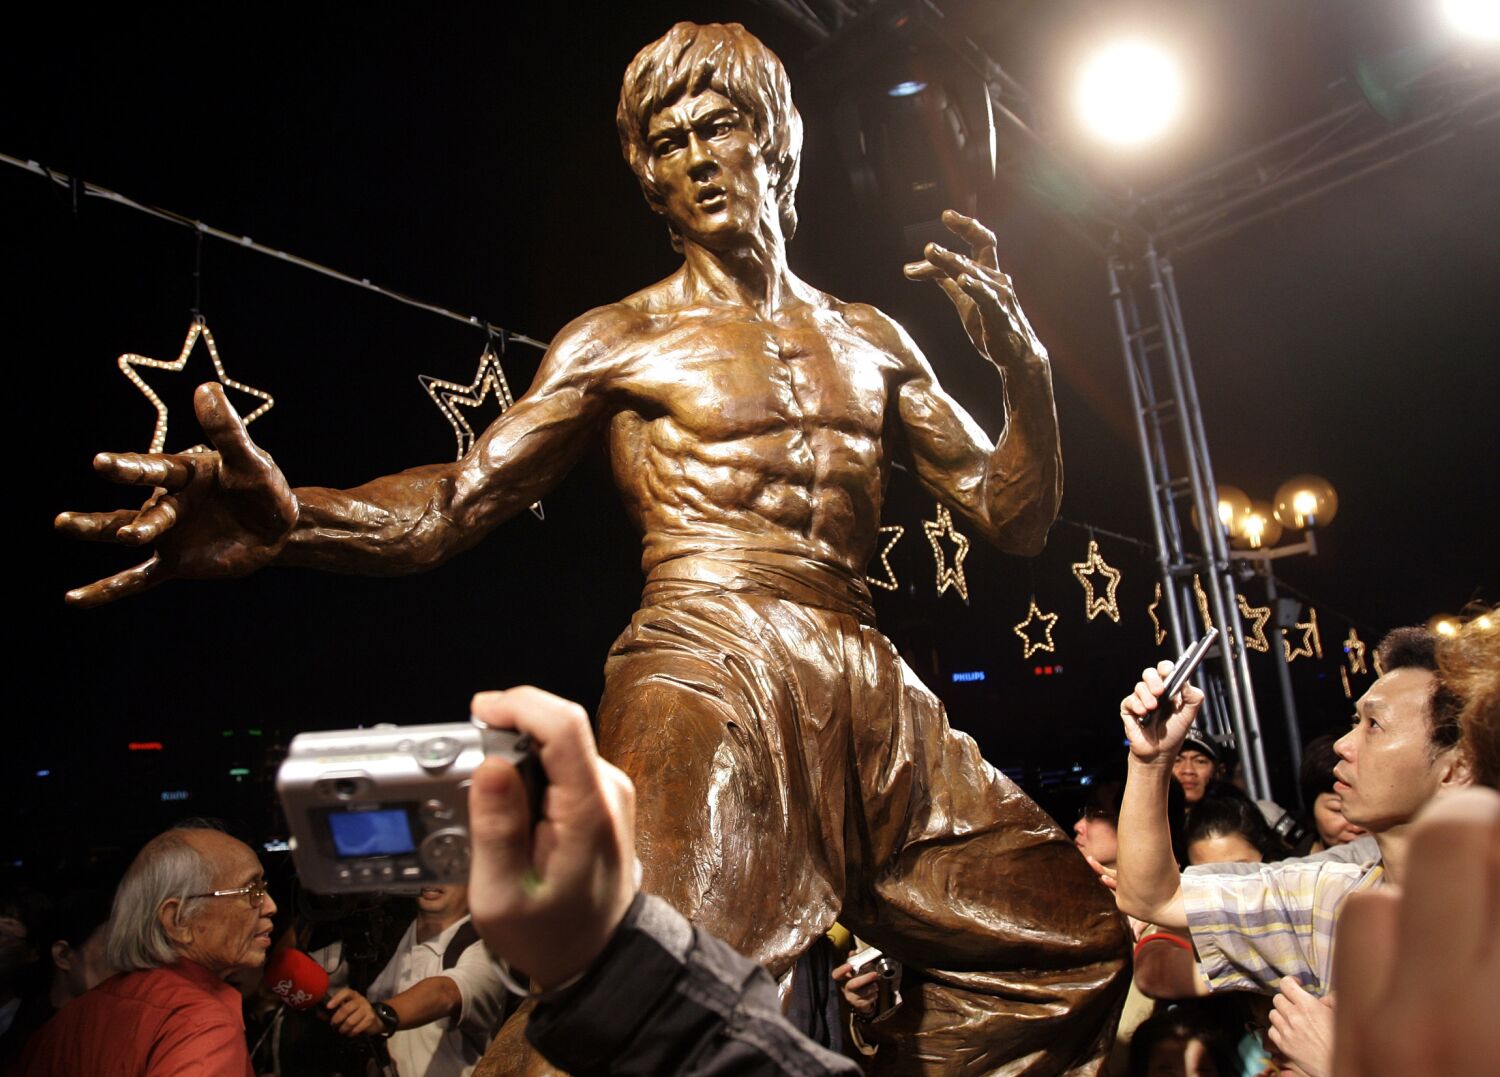 Kidney specialists float a new theory after revisiting Bruce Lee's cause of death